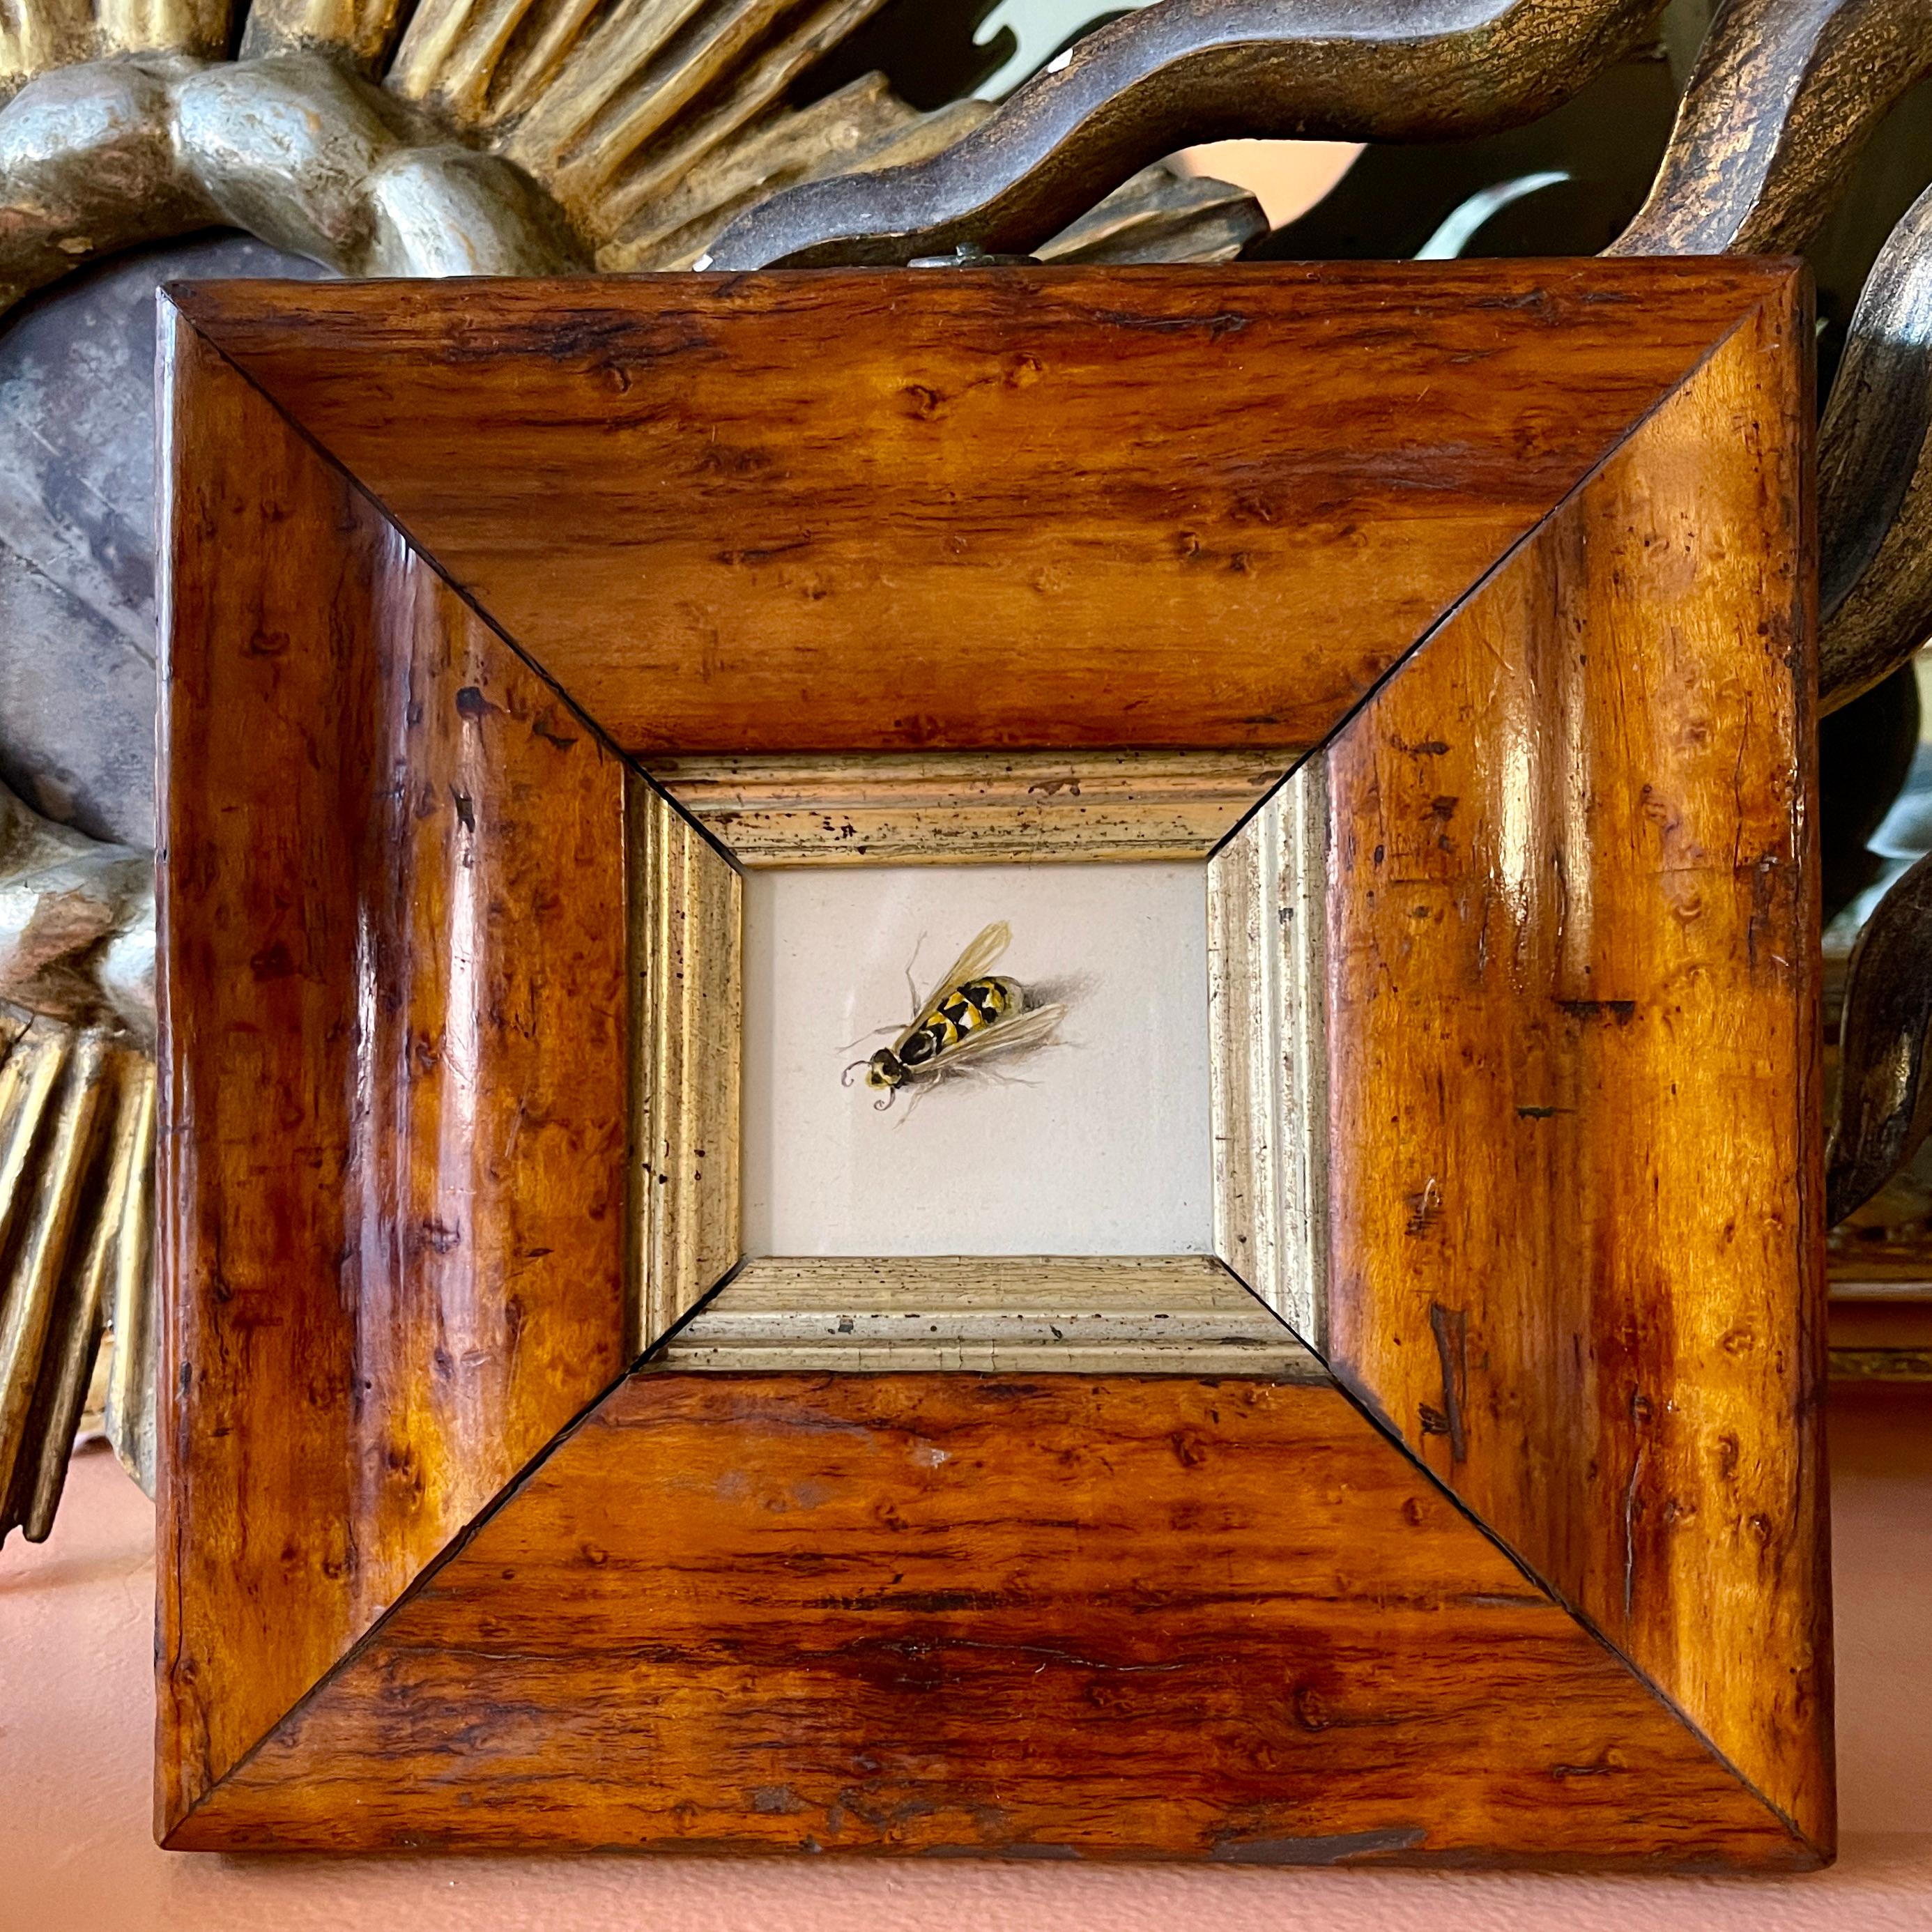 An original British School Regency Period watercolor study of a yellow-jacket wasp, mounted in a Georgian Period fruitwood frame –  circa 1825-1835.

These watercolors were largely painted by young girls from aristocratic families during the Jane